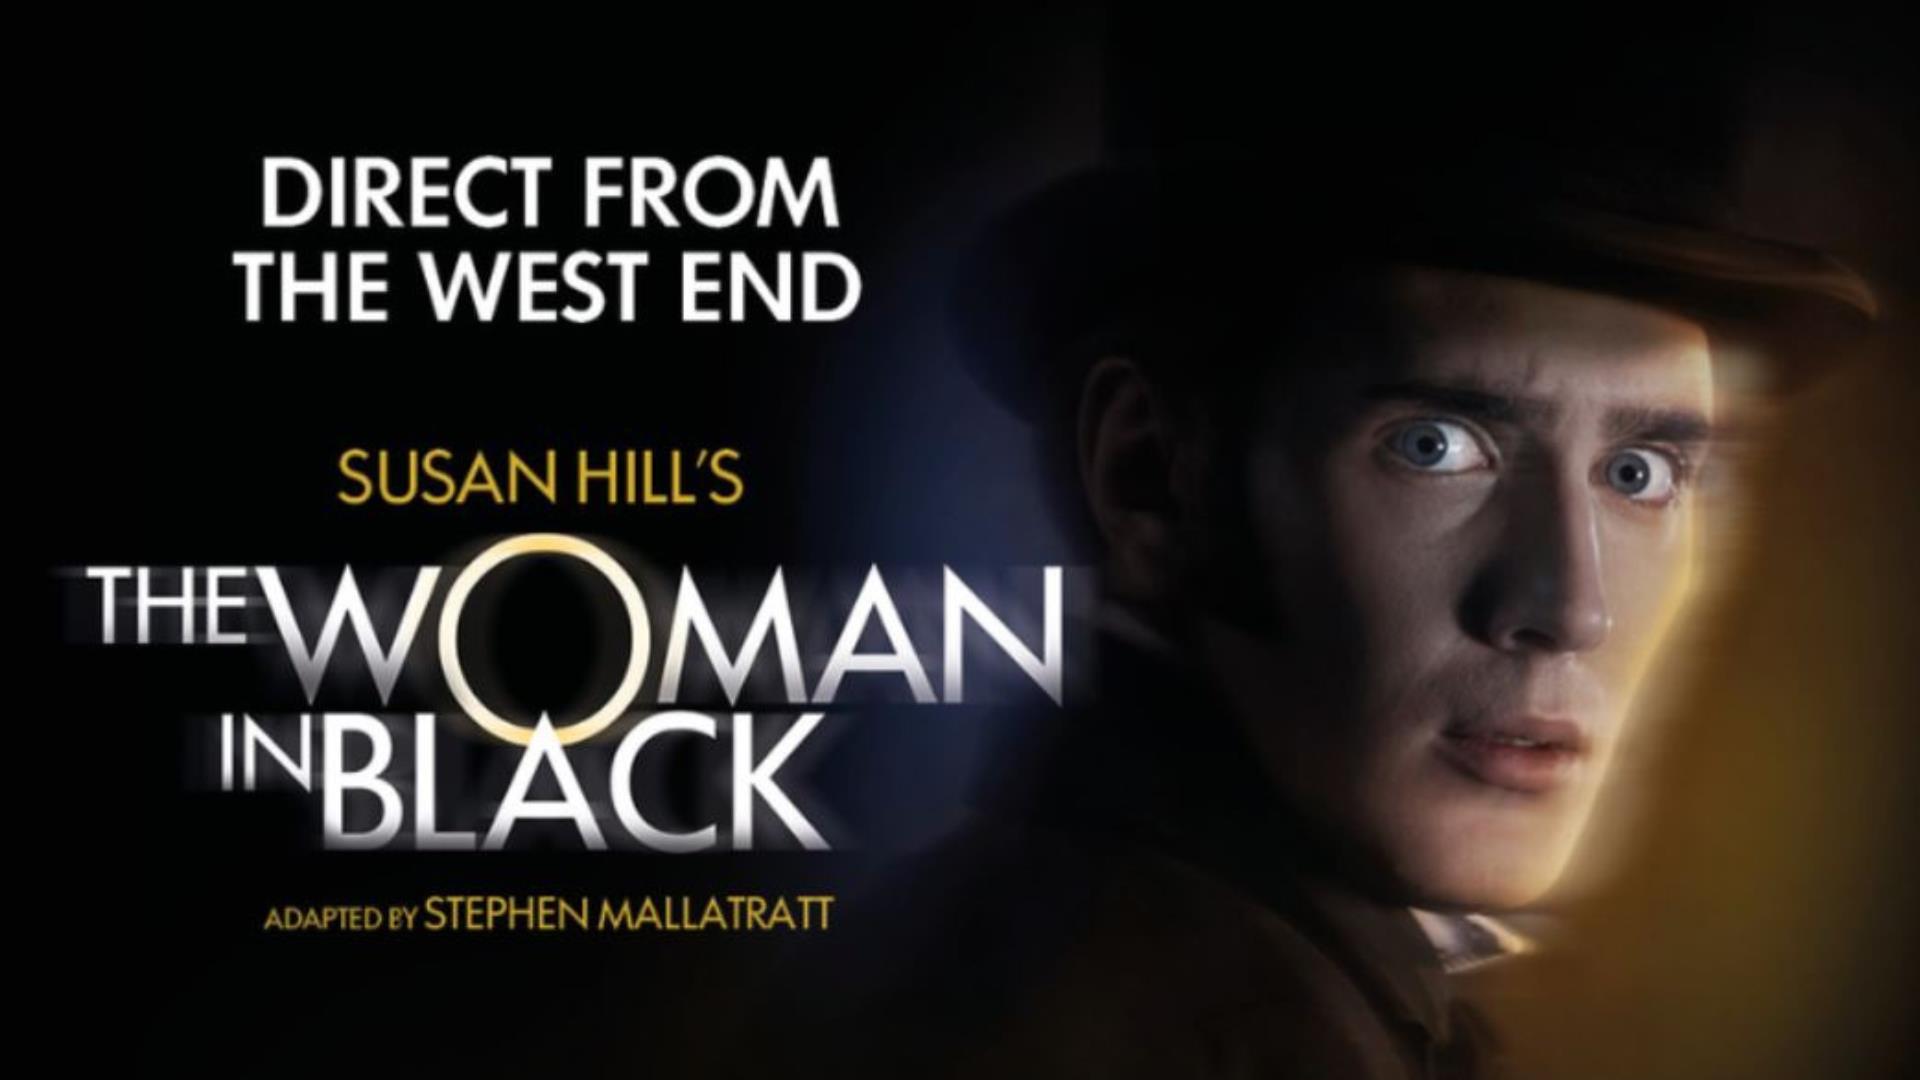 A promotional picture for 'The Woman in Black' event taking place at Millennium Forum Theatre and Conference Centre.